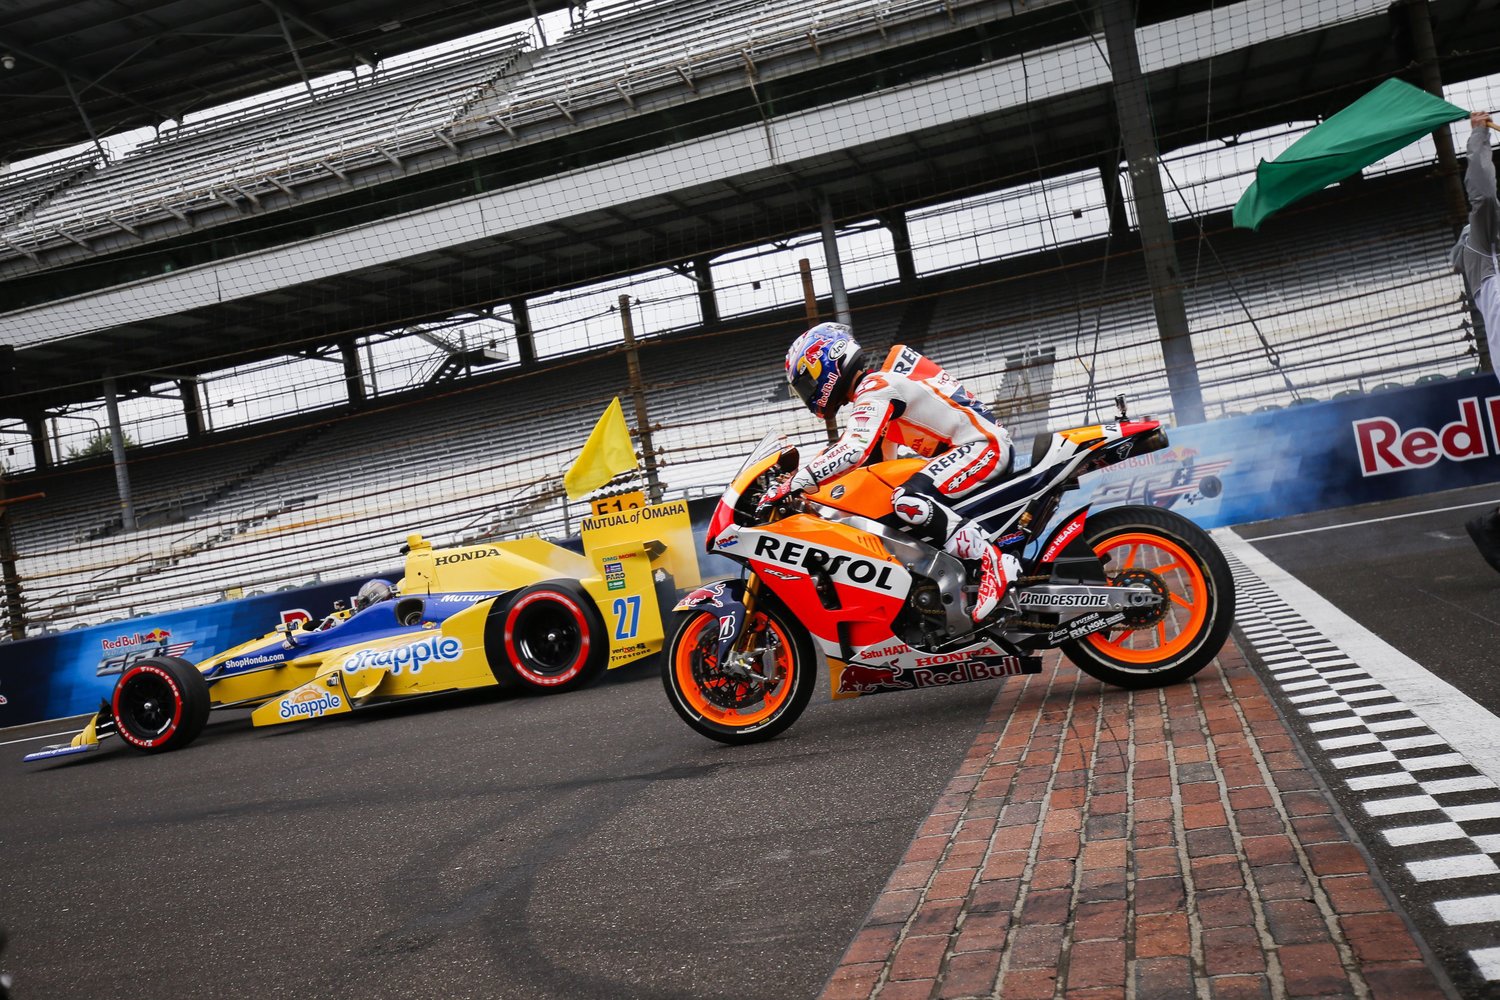 Watch a MotoGP Bike Race an IndyCar at the Indianapolis Motor Speedway